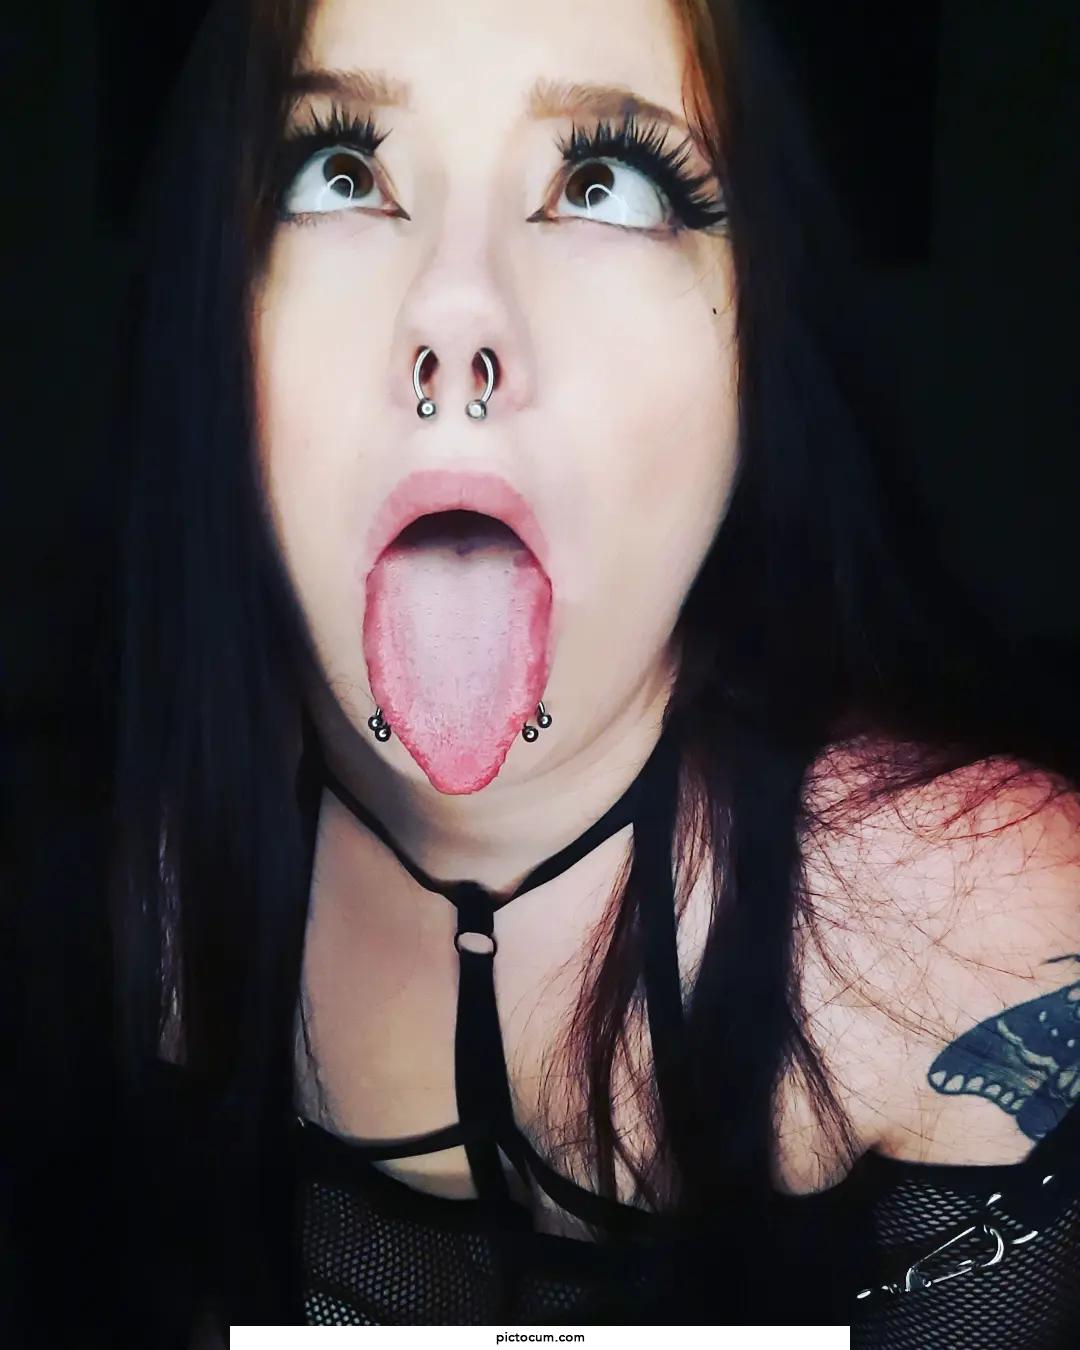 Some ahegao to make your day better 🖤